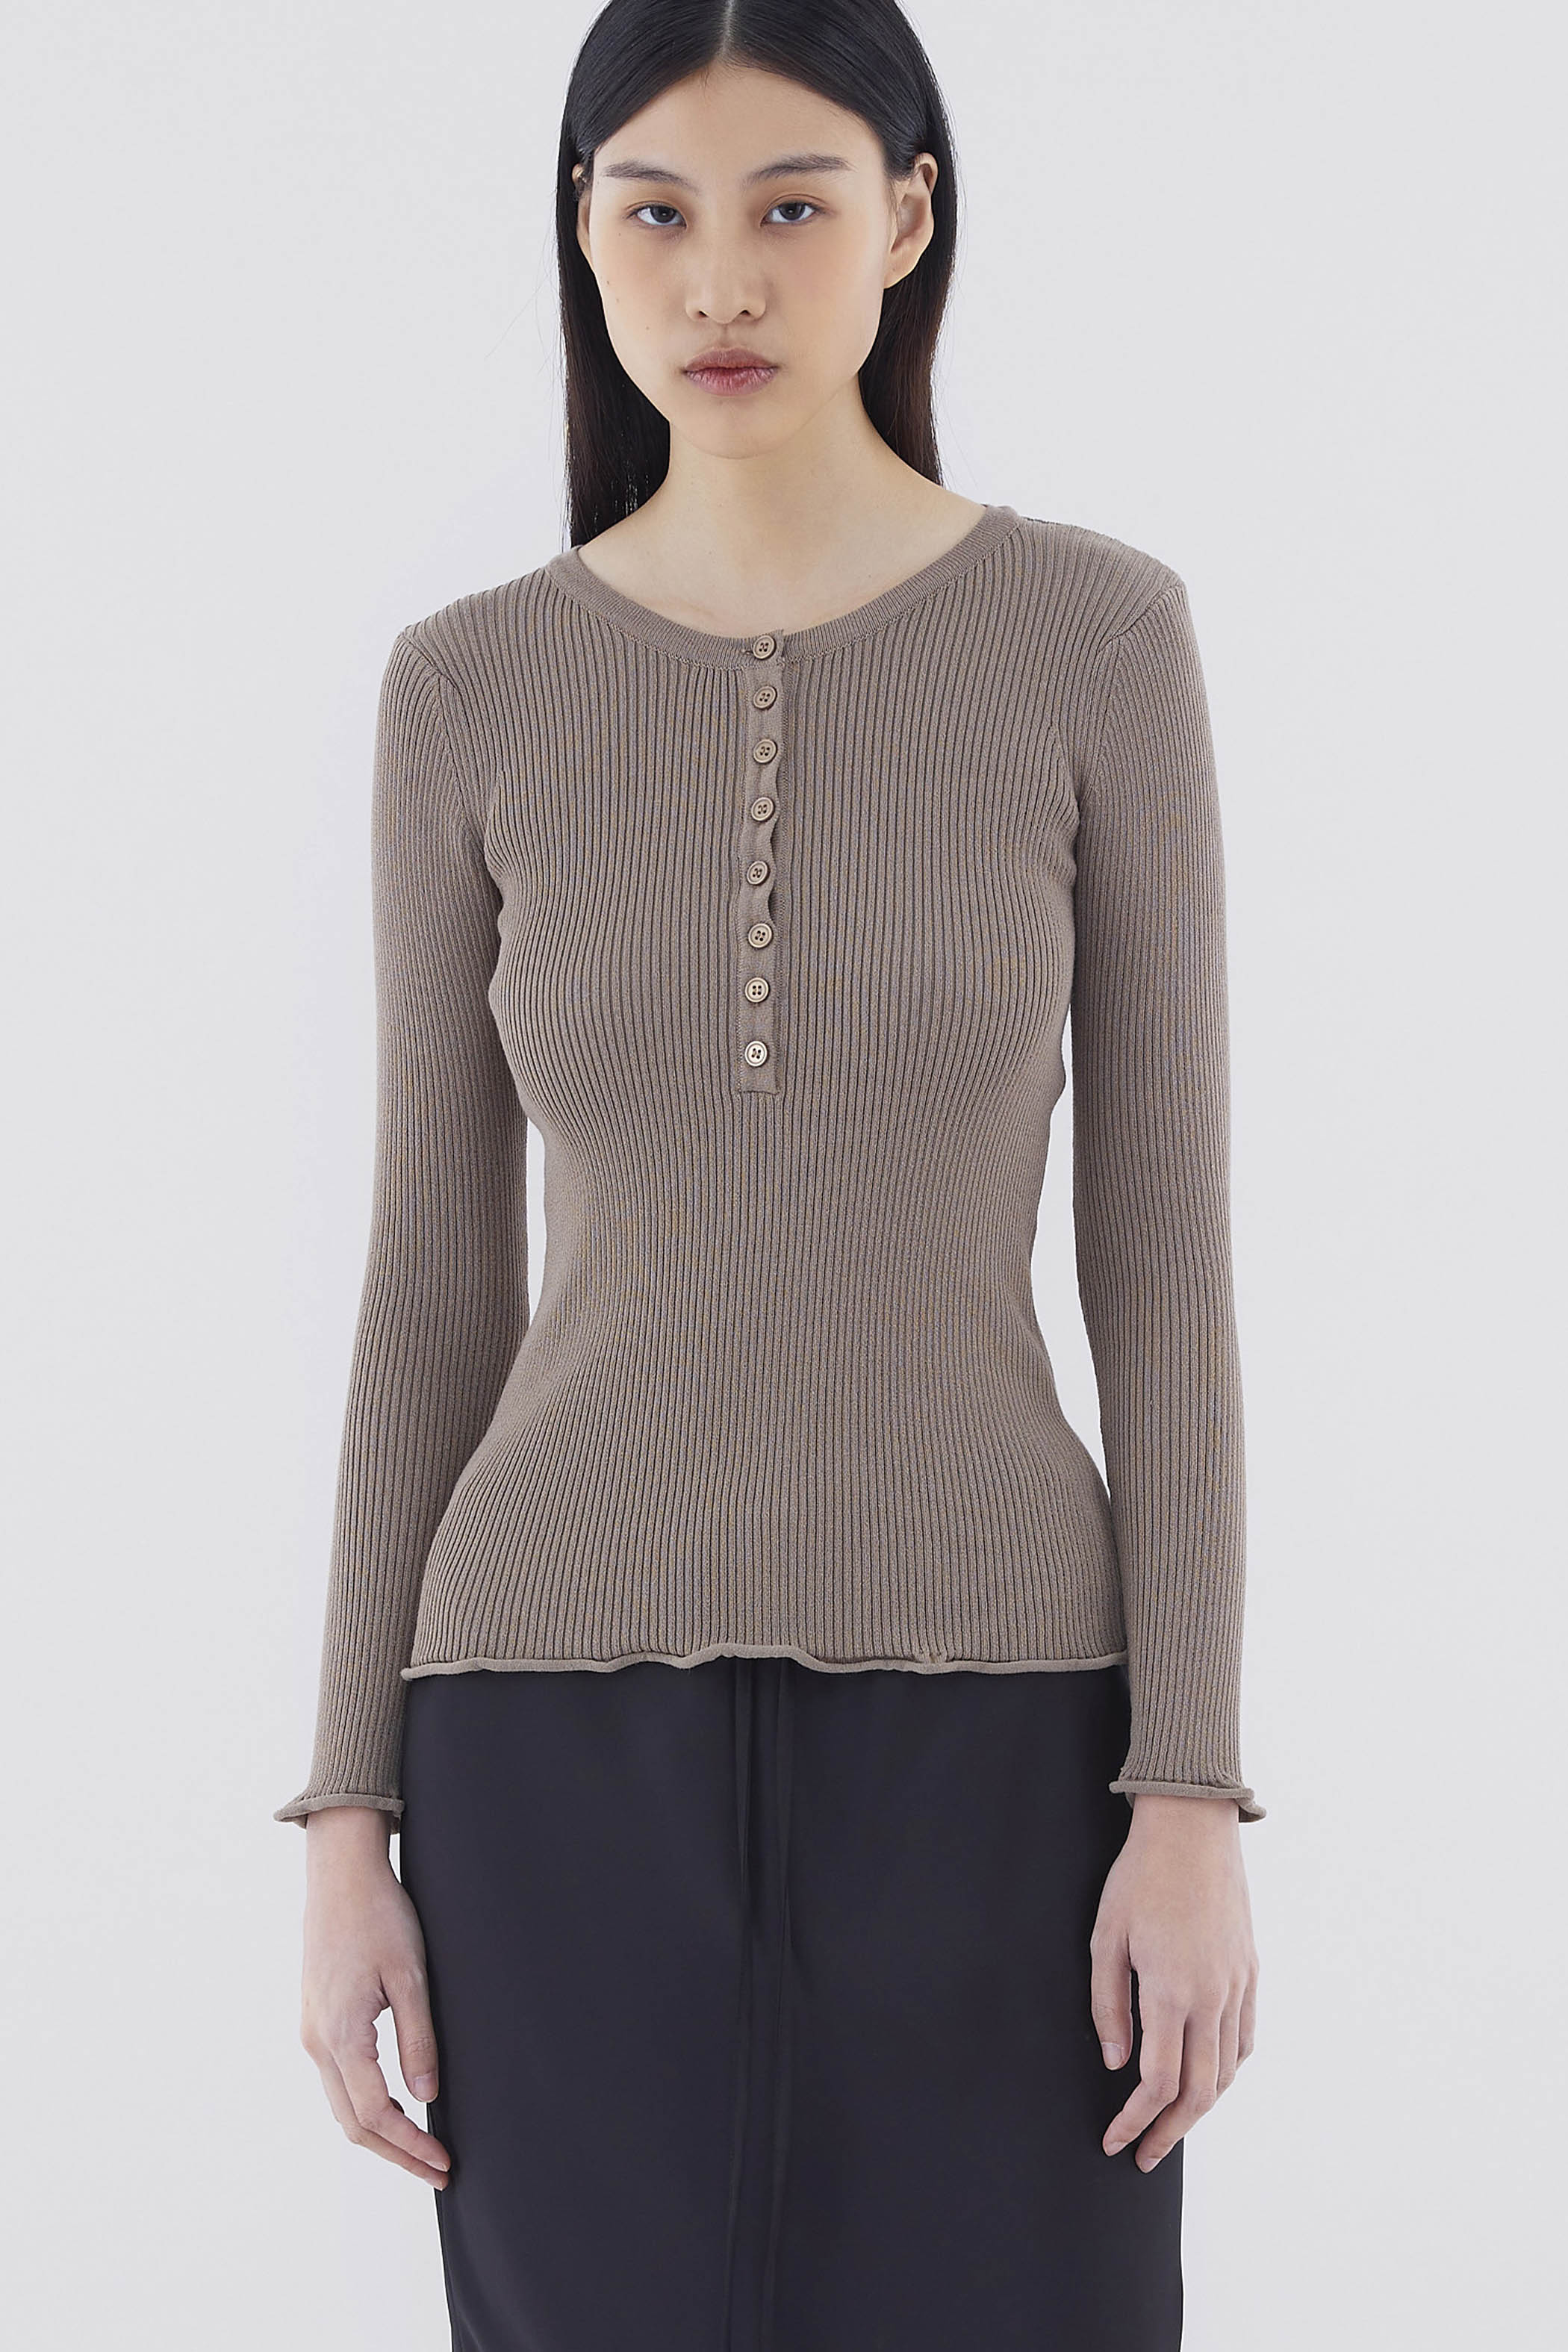 Melora Knit Top | The Editor's Market